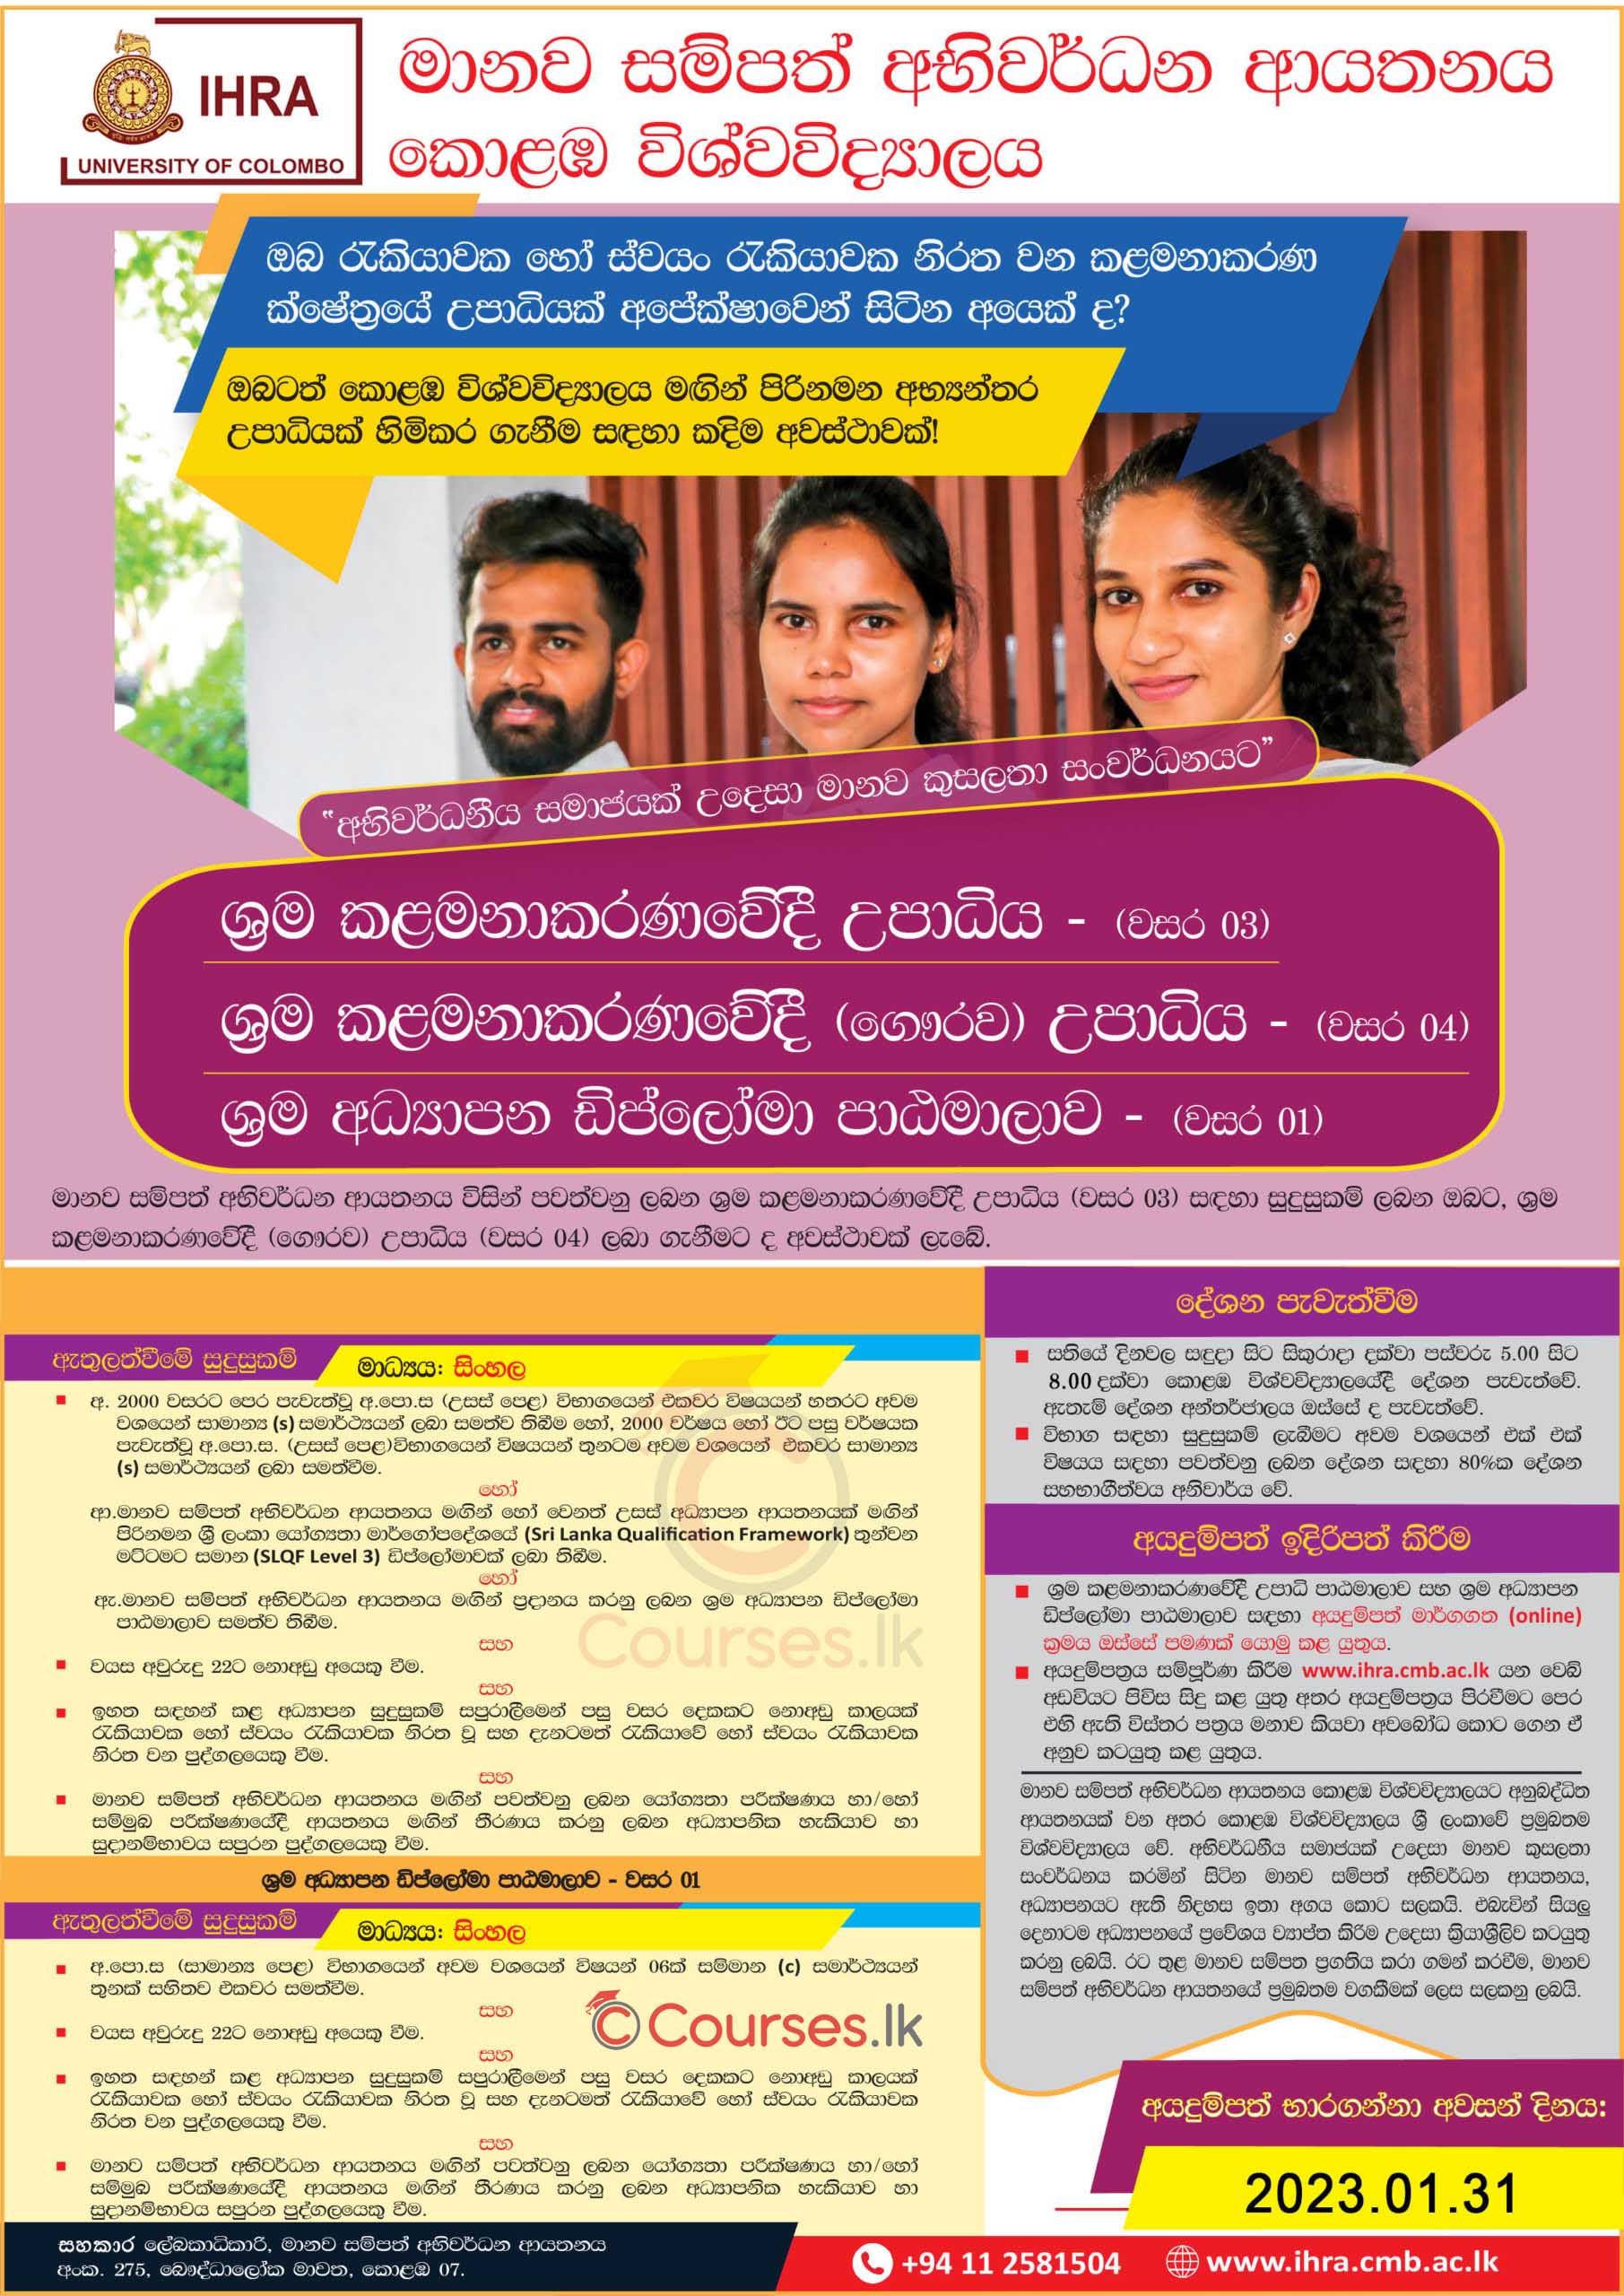 Bachelor of Labour Management (BLM) / Diploma in Labour Education (DLE) 2023 - University of Colombo